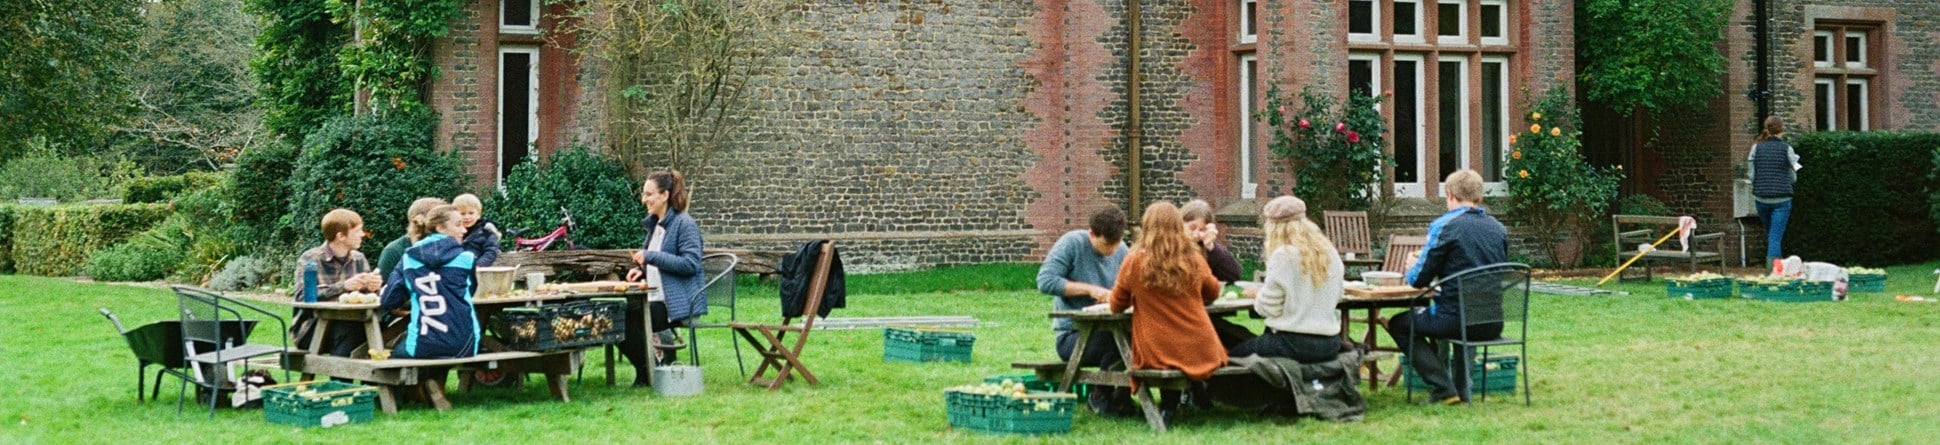 People sat on picnic benches outside a historic house.